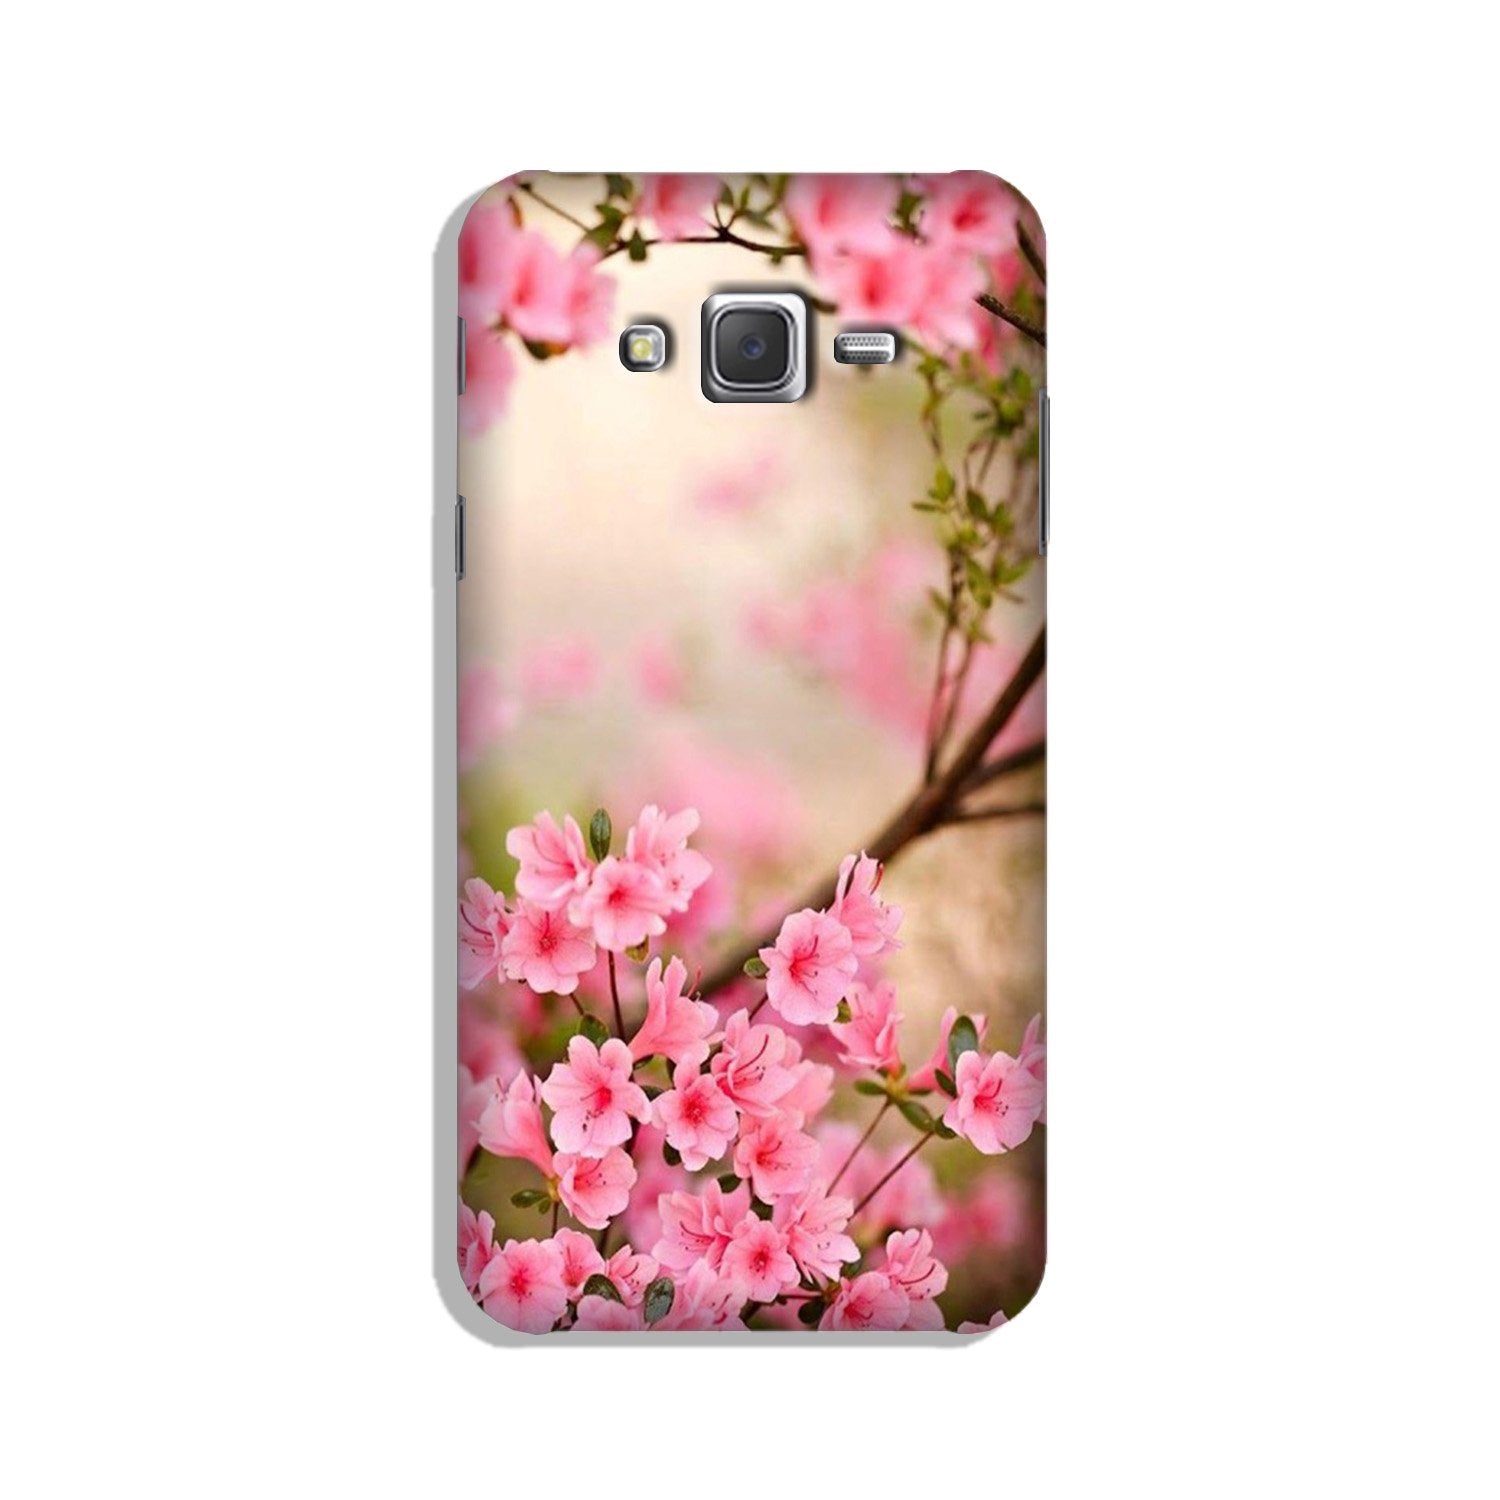 Pink flowers Case for Galaxy J2 (2015)